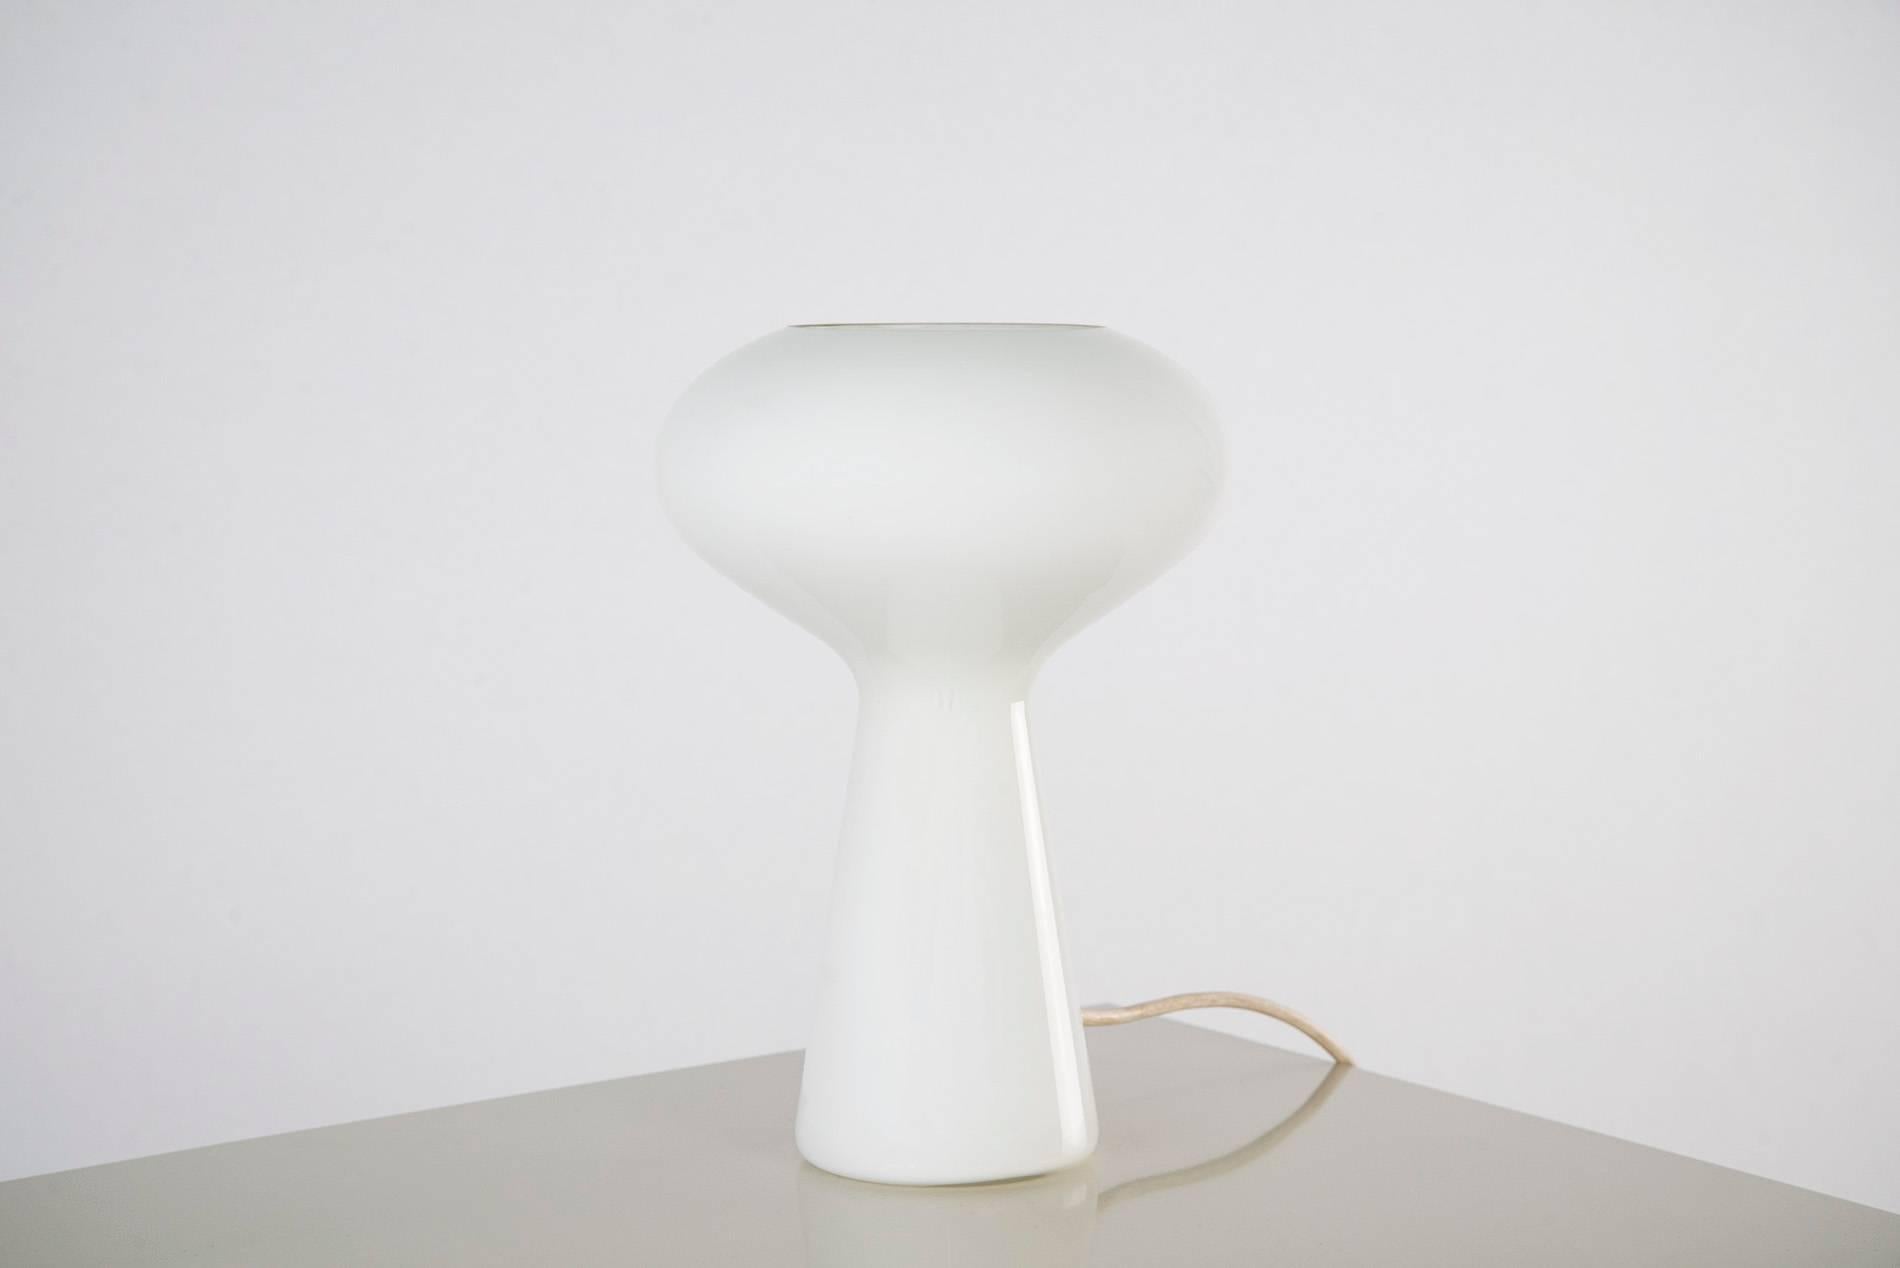 Table lamp in white encased Murano glass after Massimo Vignelli, manufactured in Italy in the 1960s.